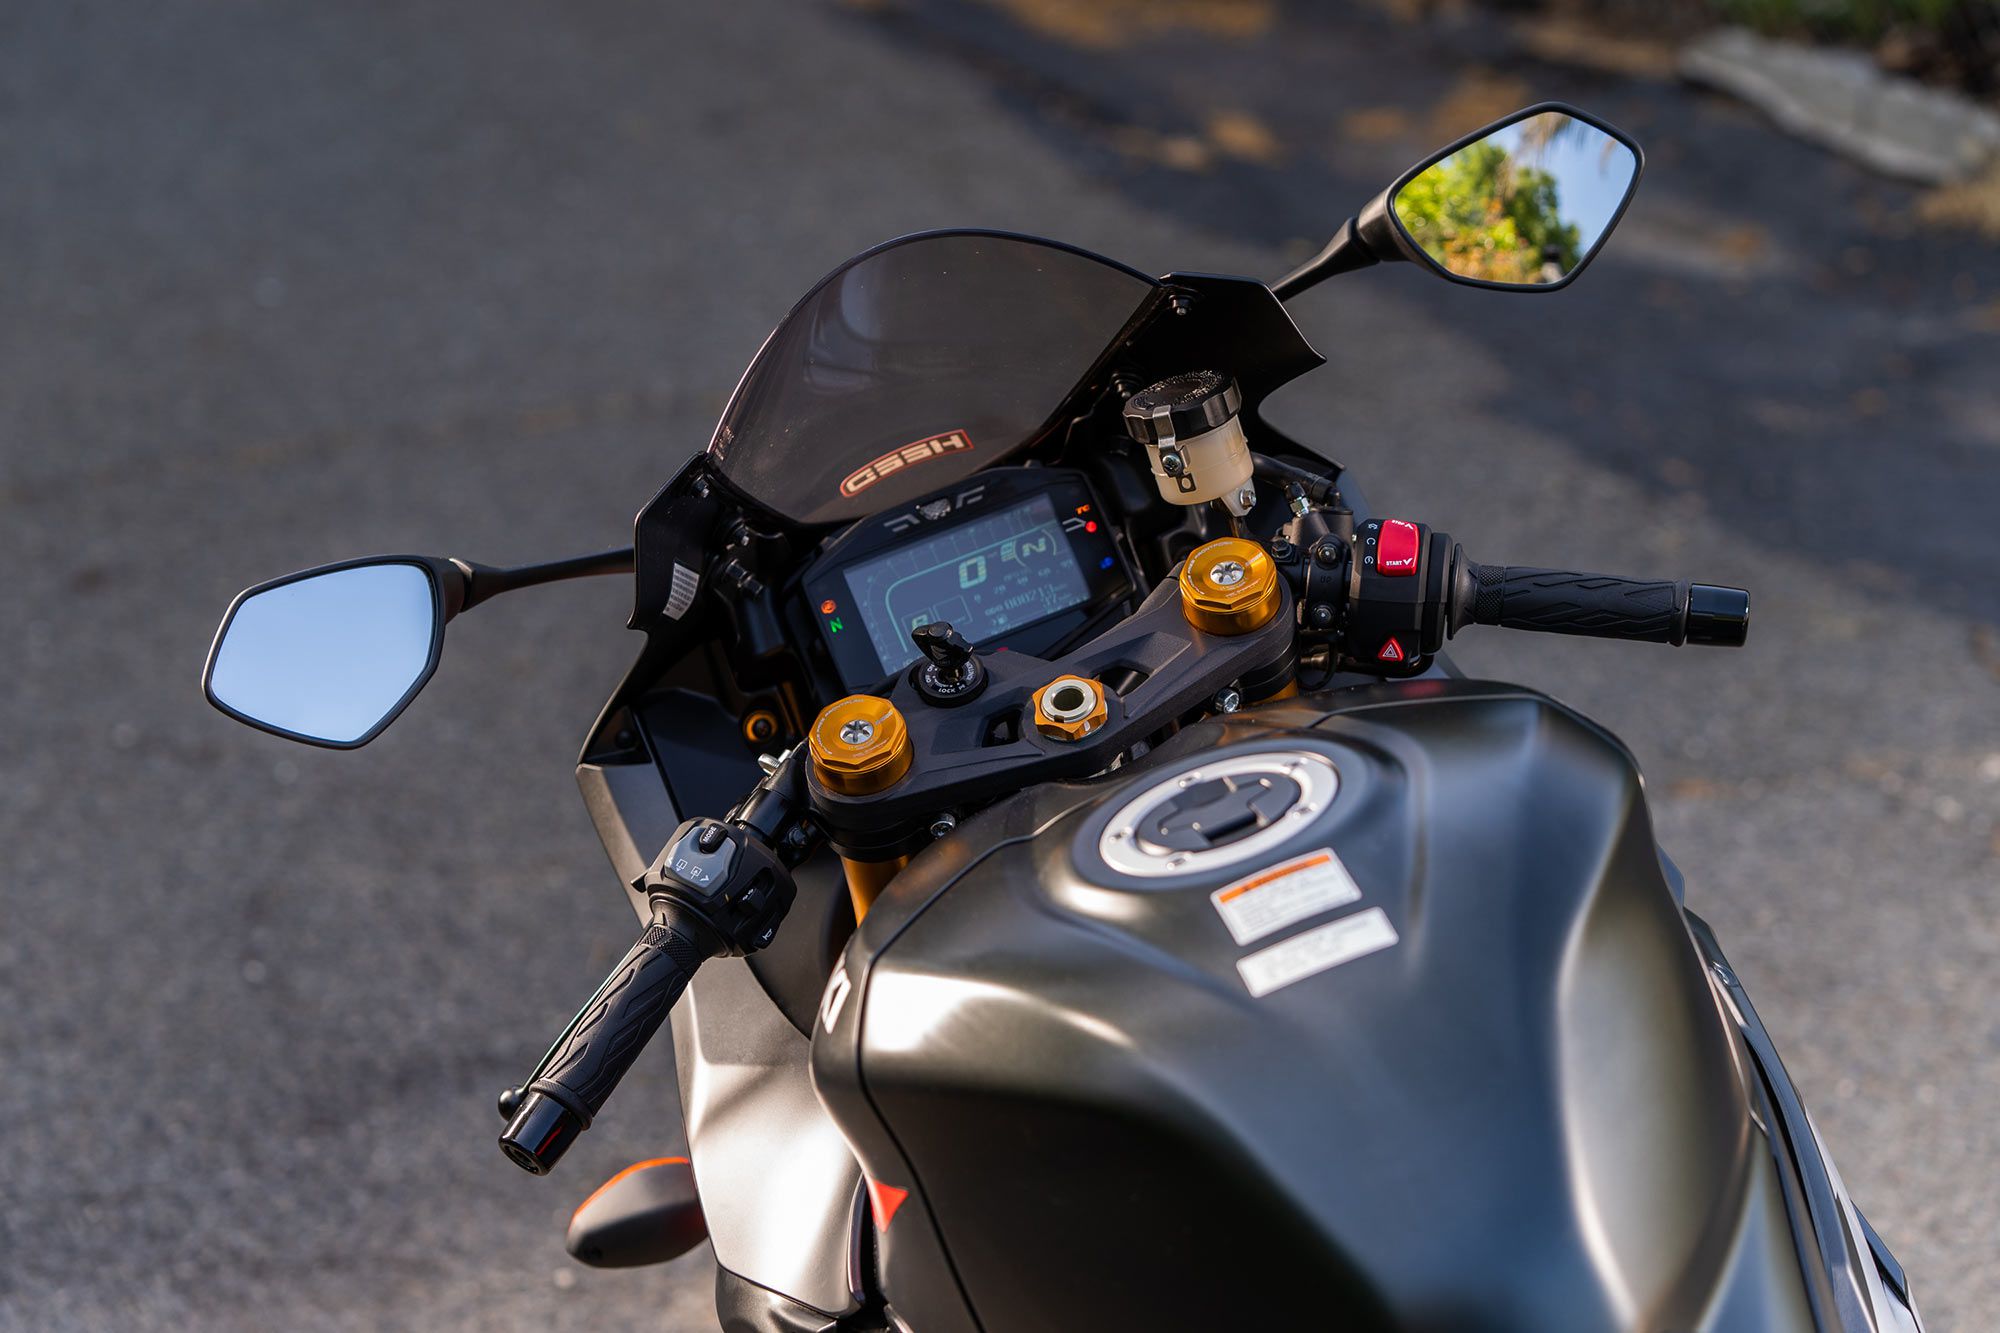 The cockpit of the GSX-R1000R is one of the more comfortable in the liter-and-above sportbike segment.